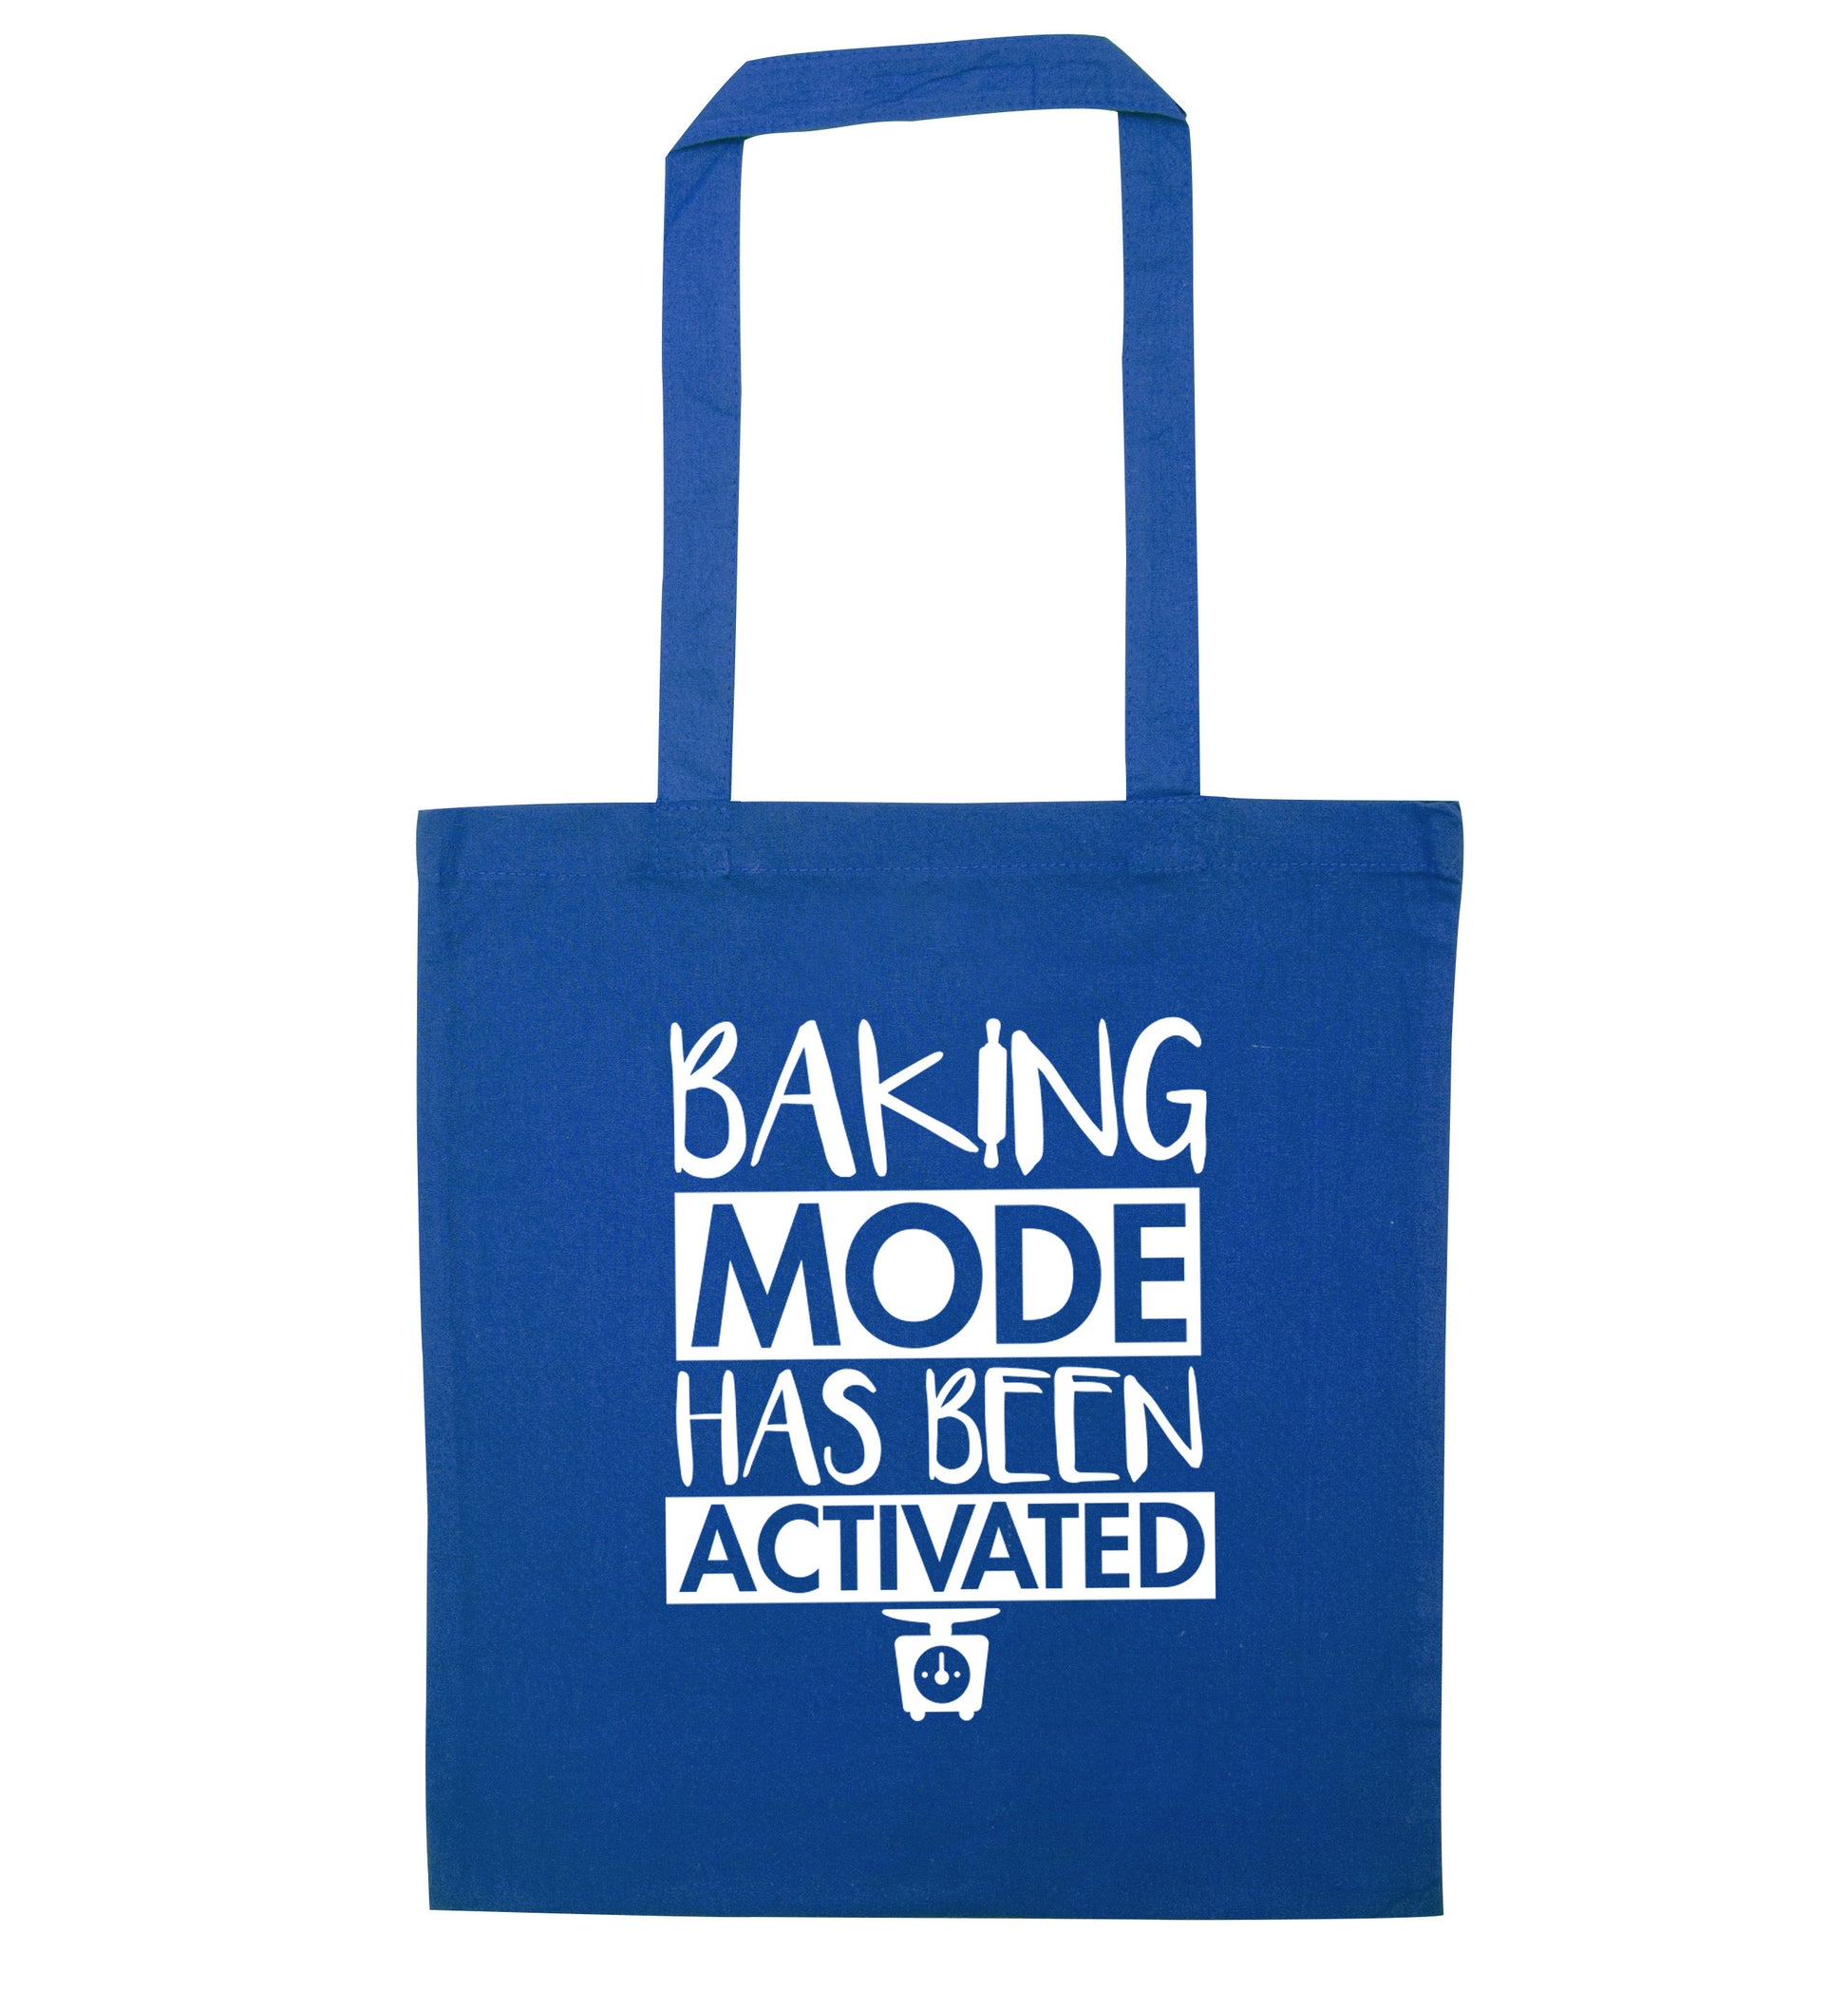 Baking mode has been activated blue tote bag